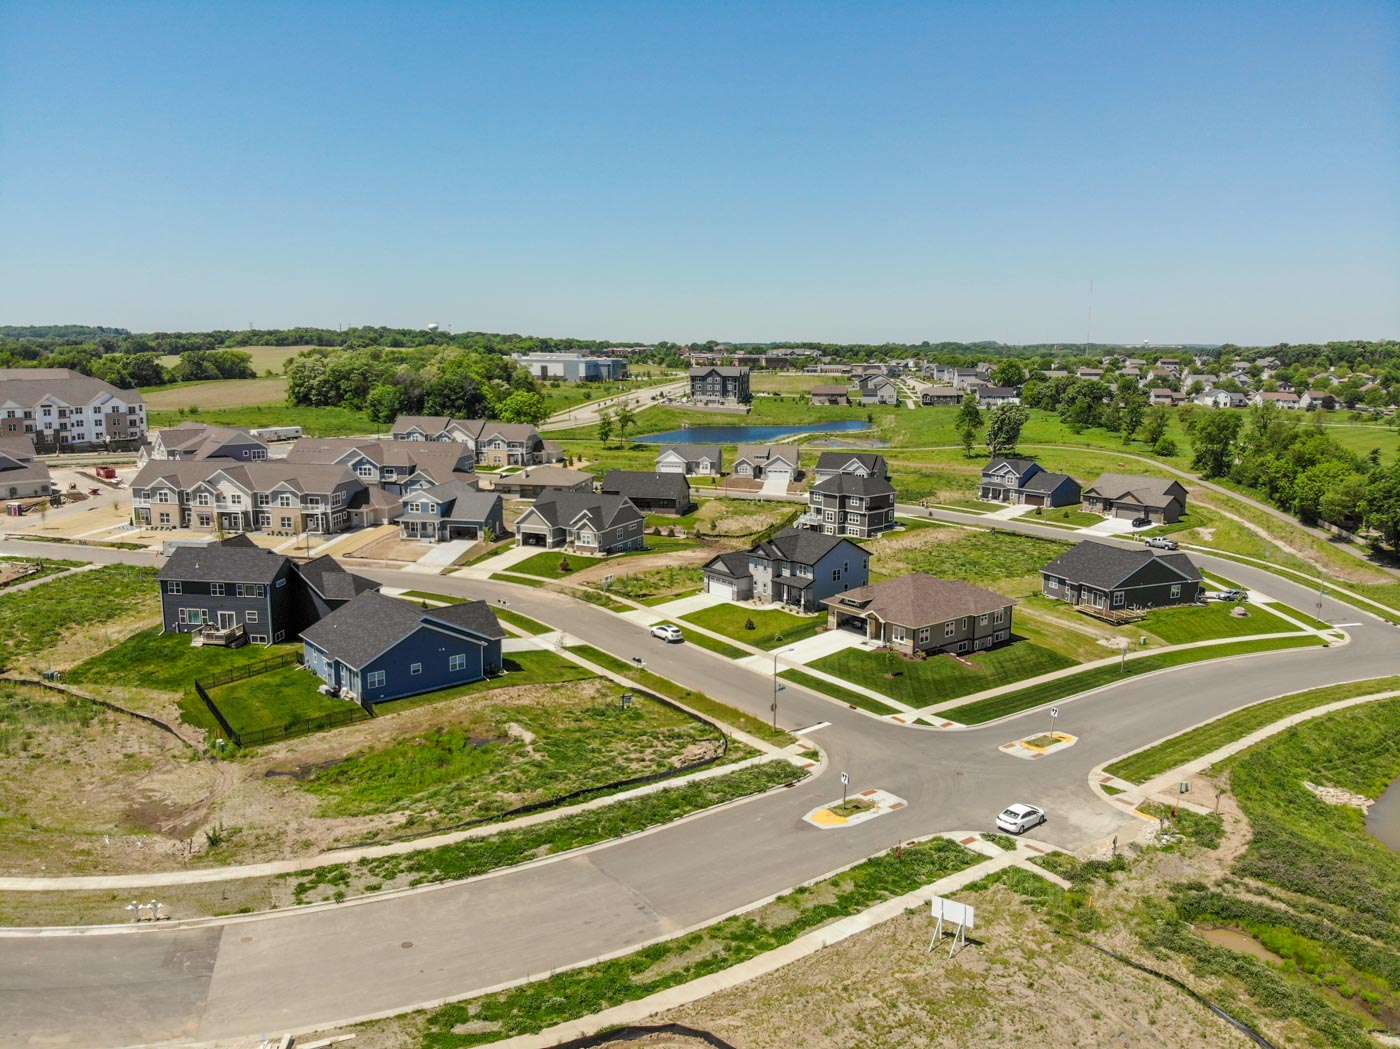 New housing development in Fahey Fields located in Fitchburg Wisconsin.